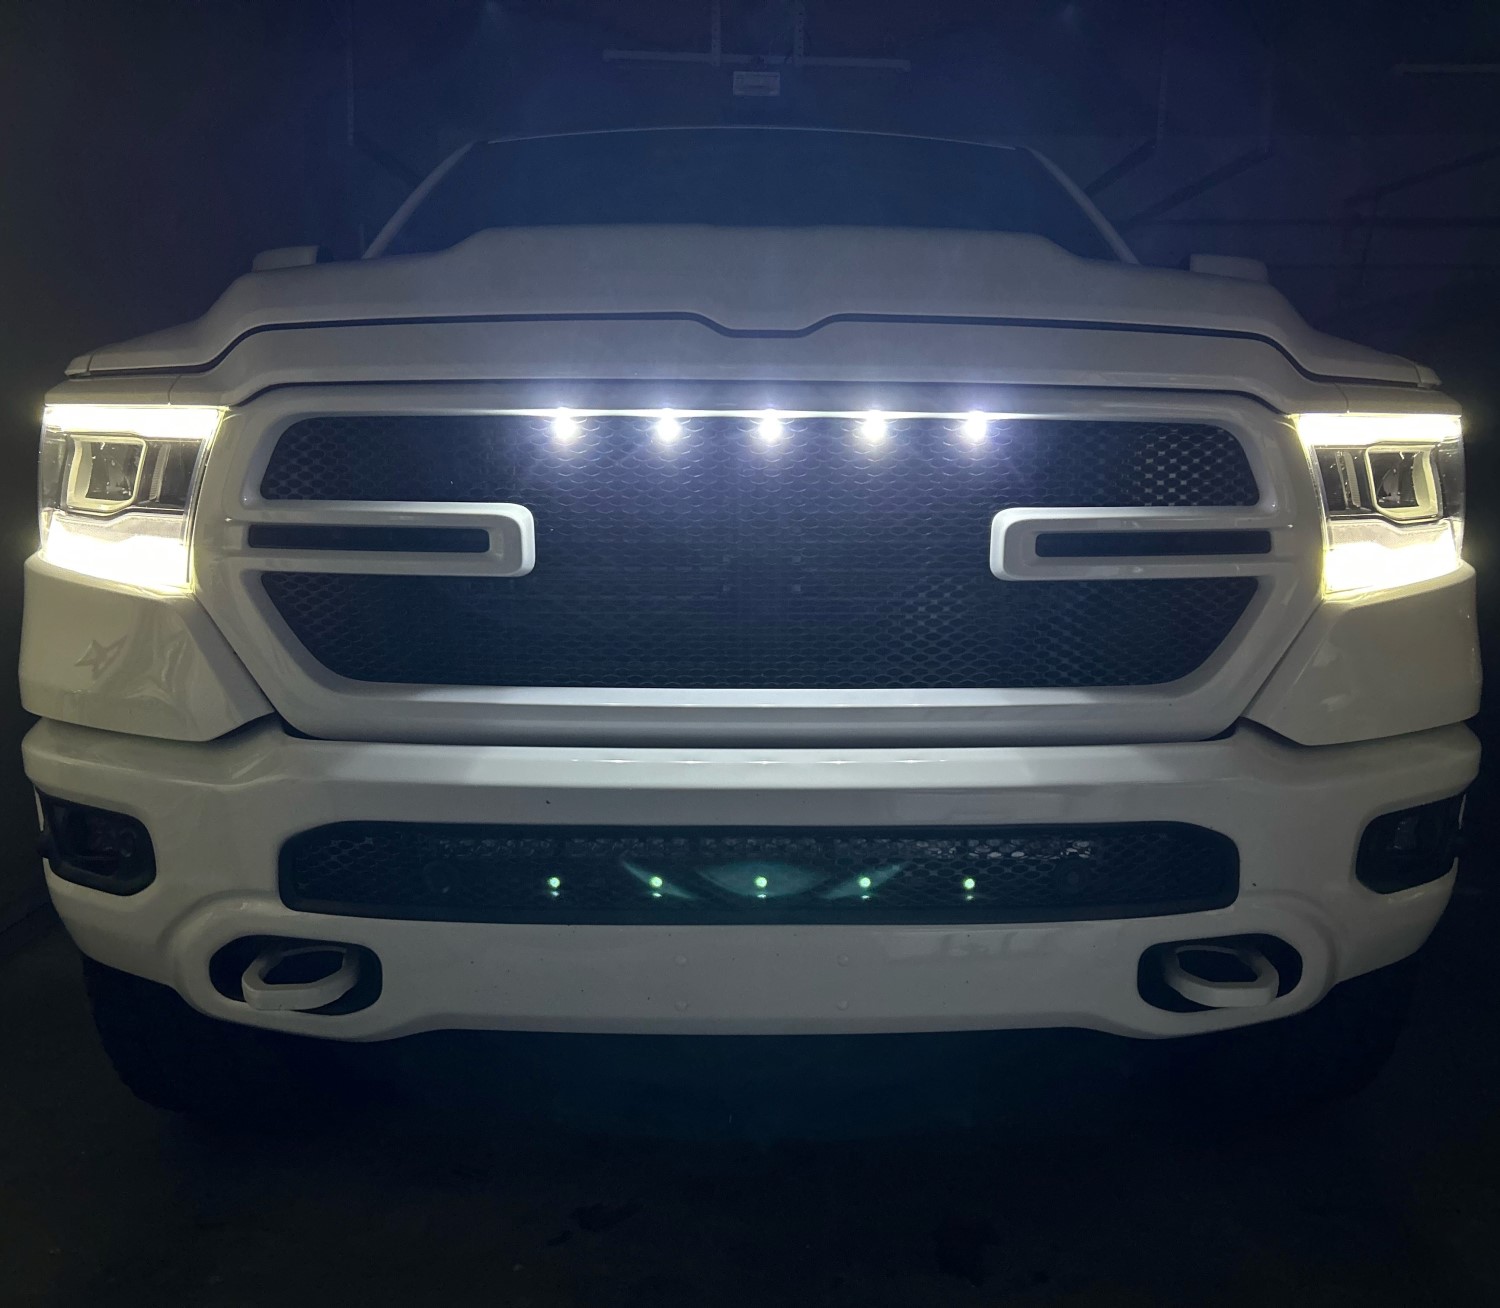 Bolt Style LEDs - The Small Light that Makes a Big Impact on Custom Grilles